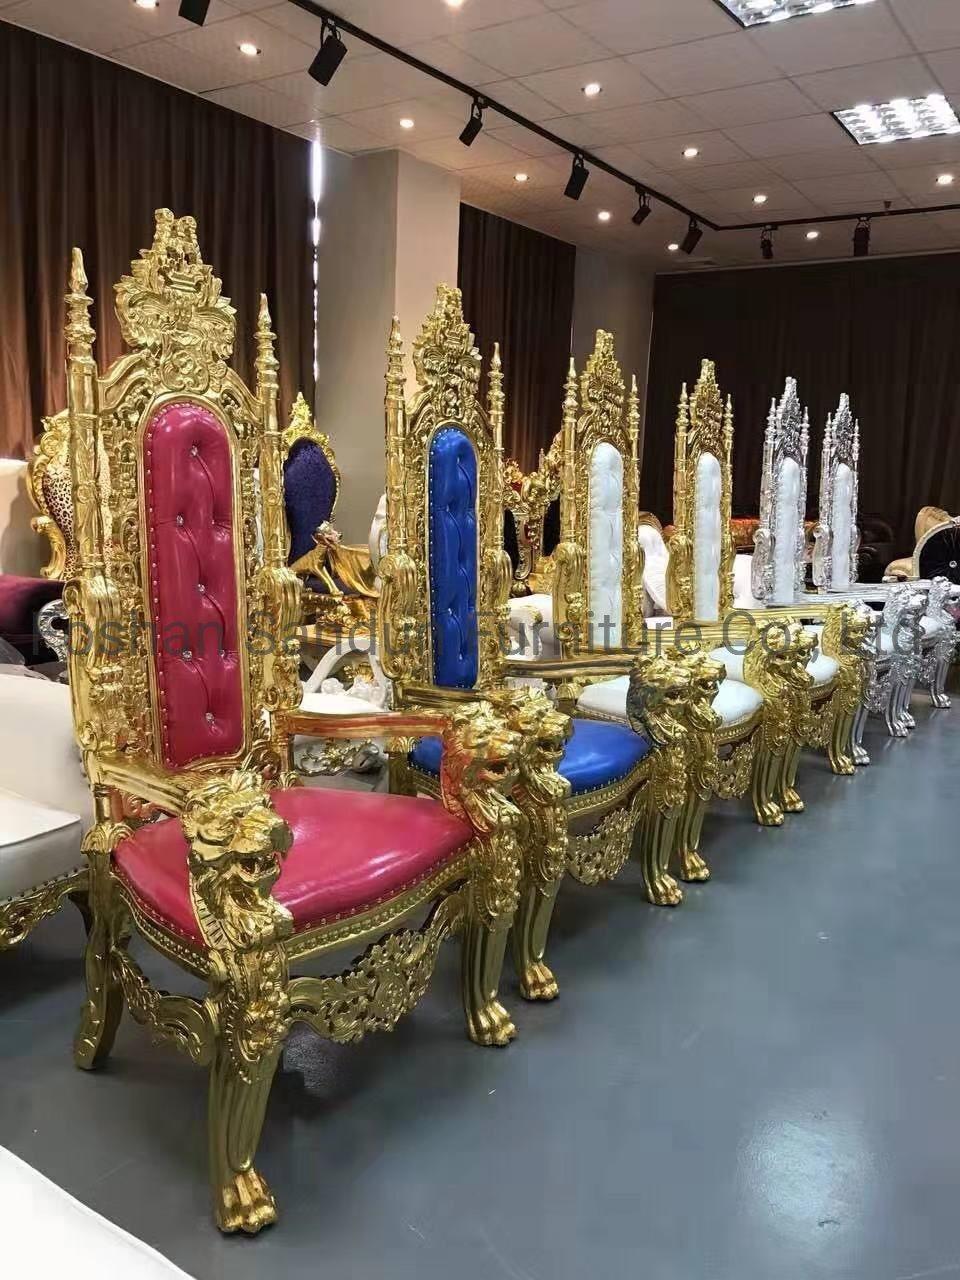 Customized Golden Design Royal Sofa Chair for Wedding and Event